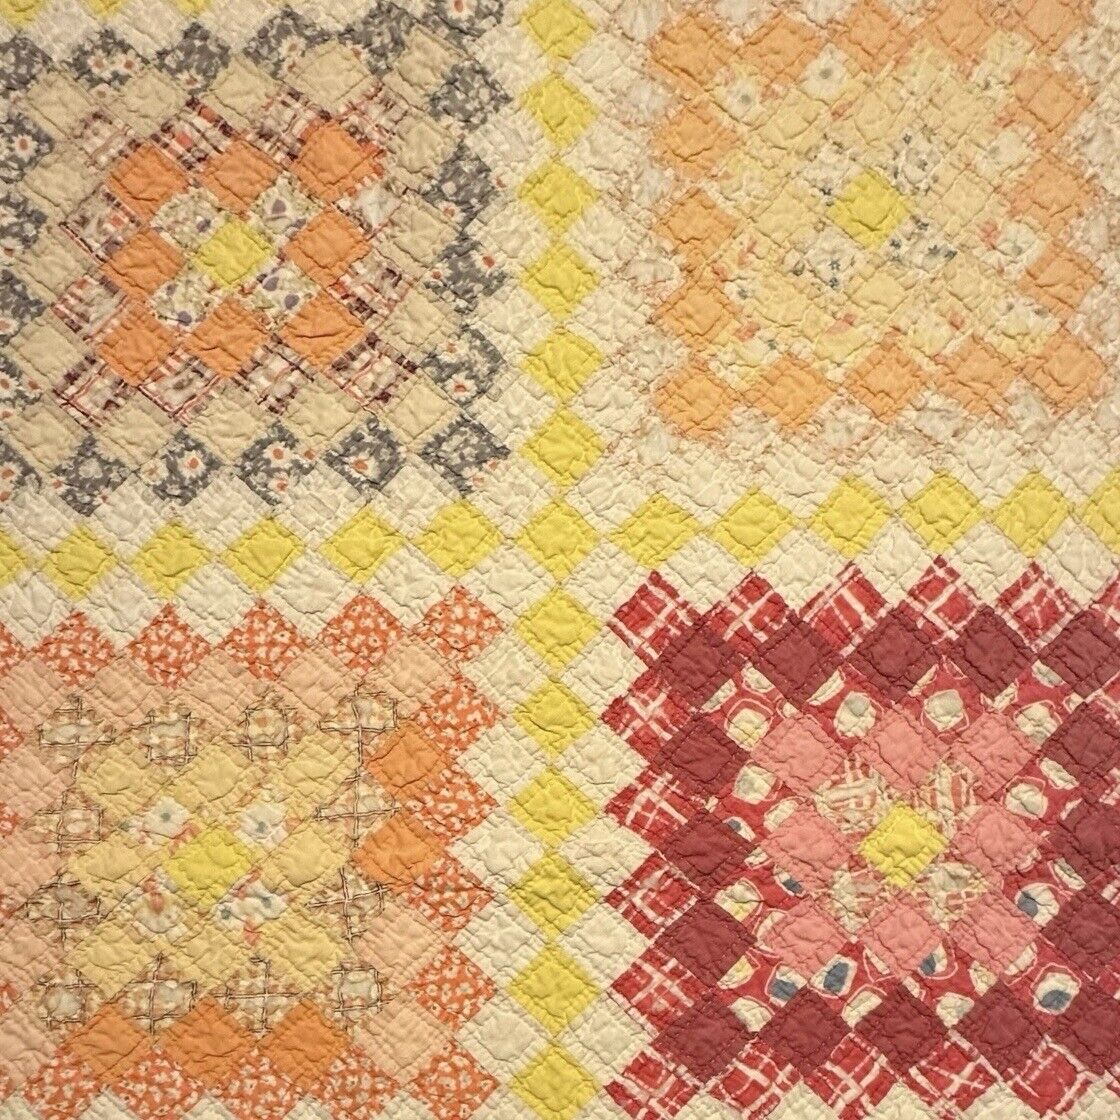 Vintage Cutter Quilt Piece 21” x 22” Beautiful Quilting  Worn & Tattered #3